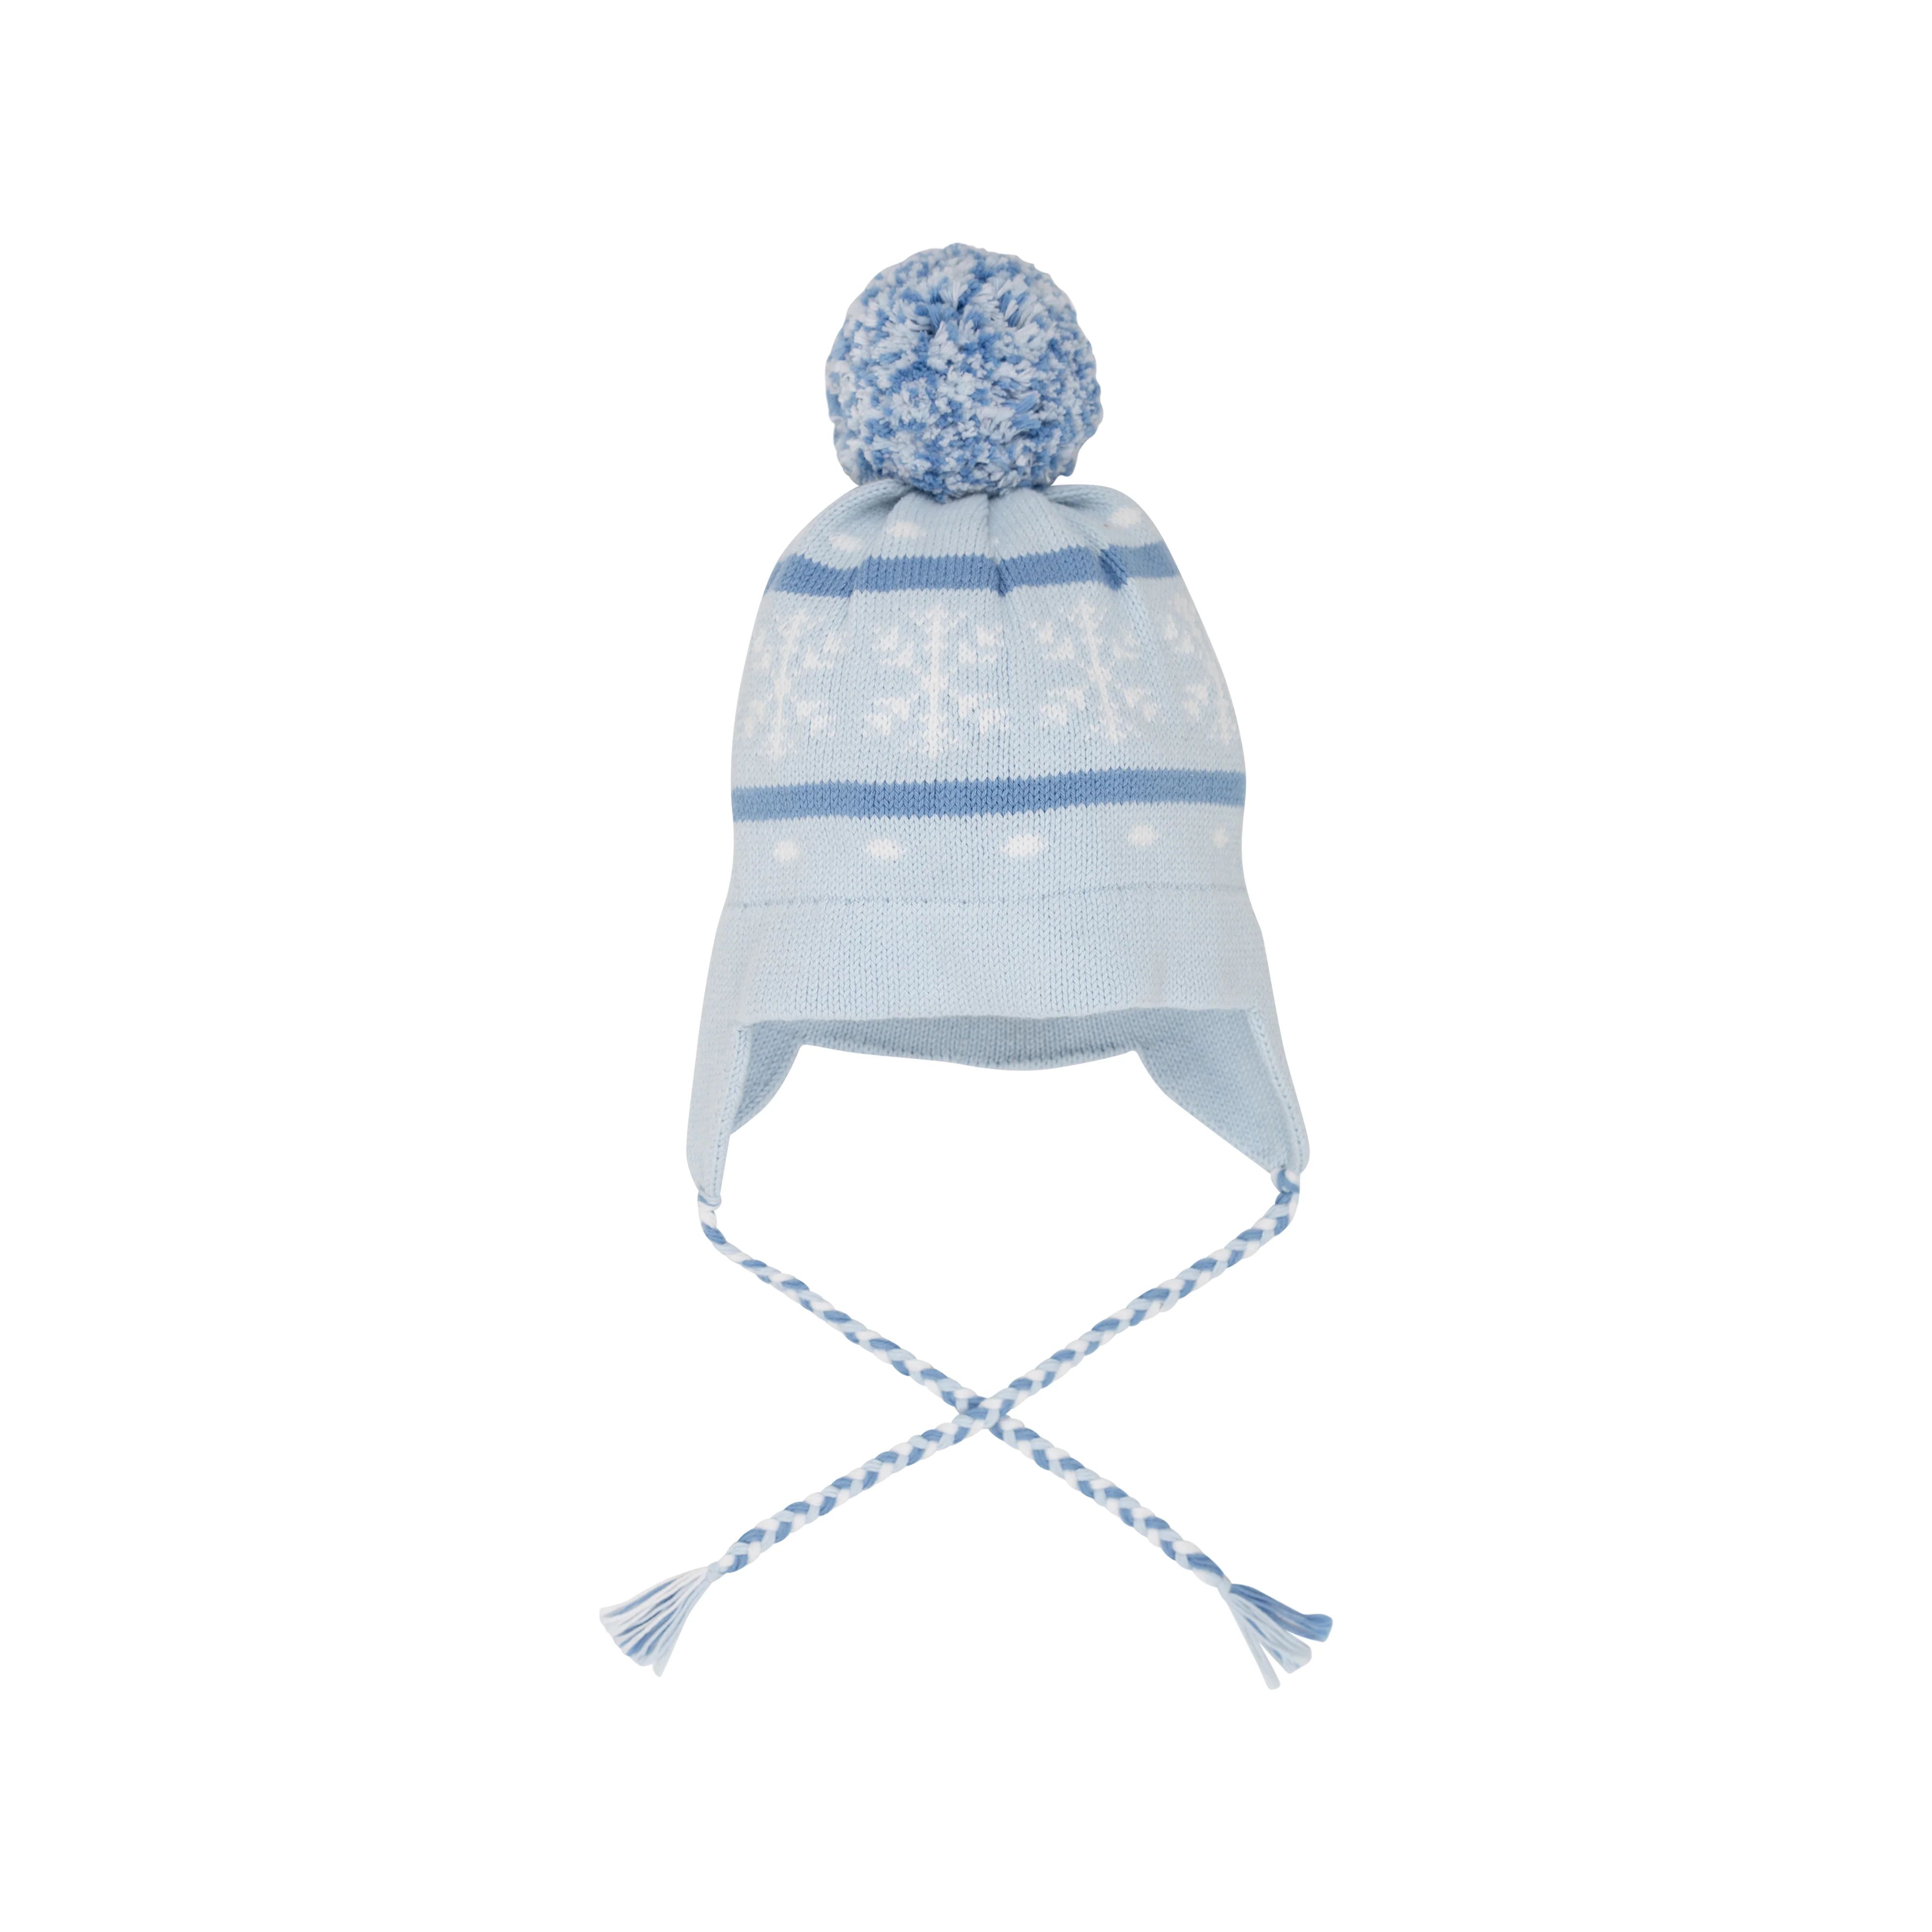 Parrish Pom Pom Hat - Buckhead Blue Knit with Barbados Blue & Snowflakes | The Beaufort Bonnet Company